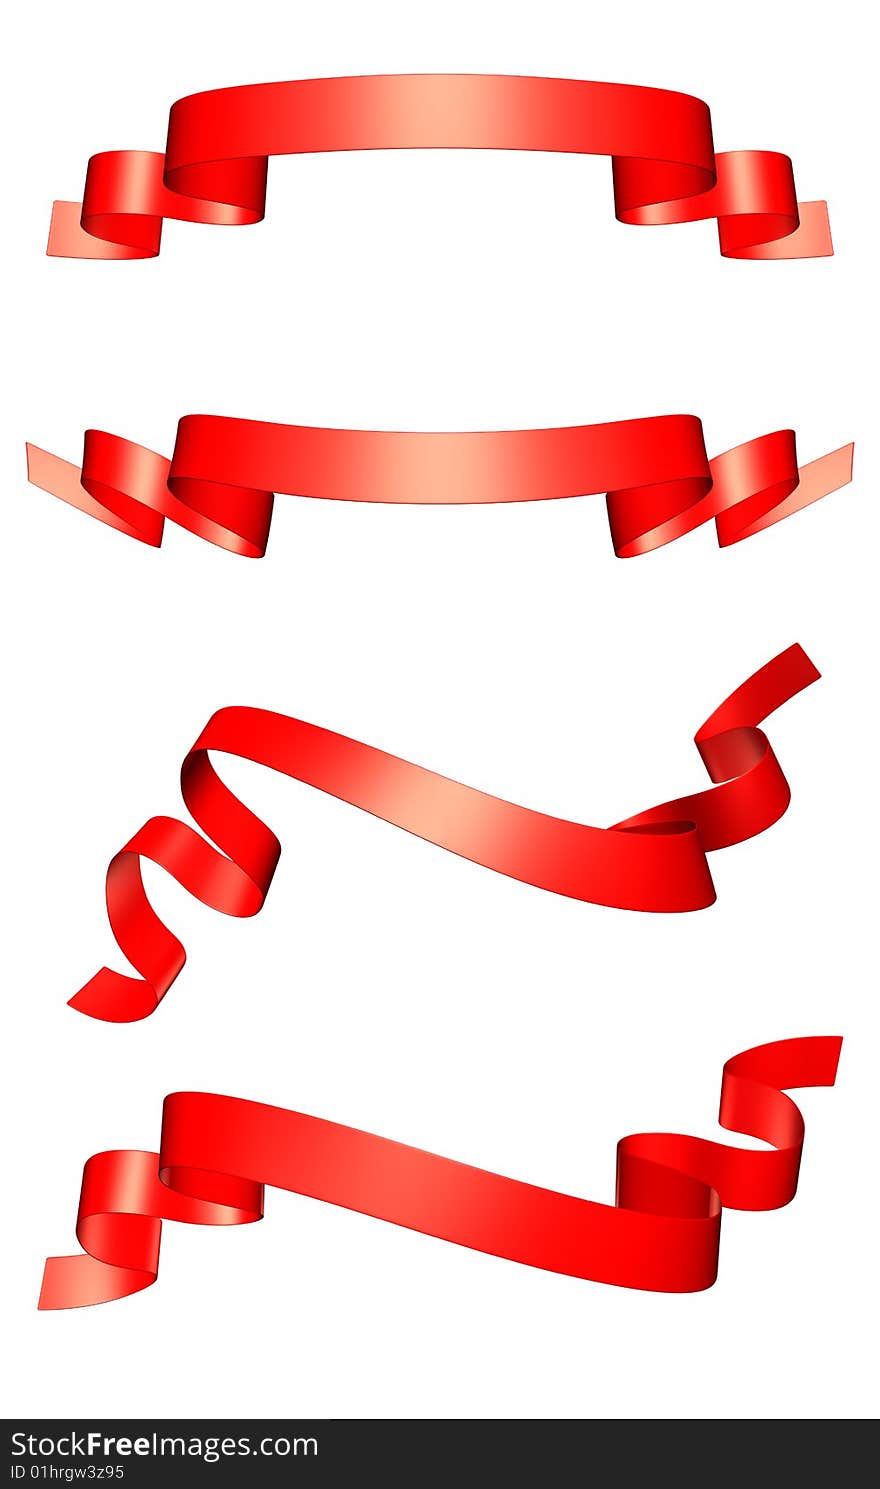 Red shiny ribbons over white background